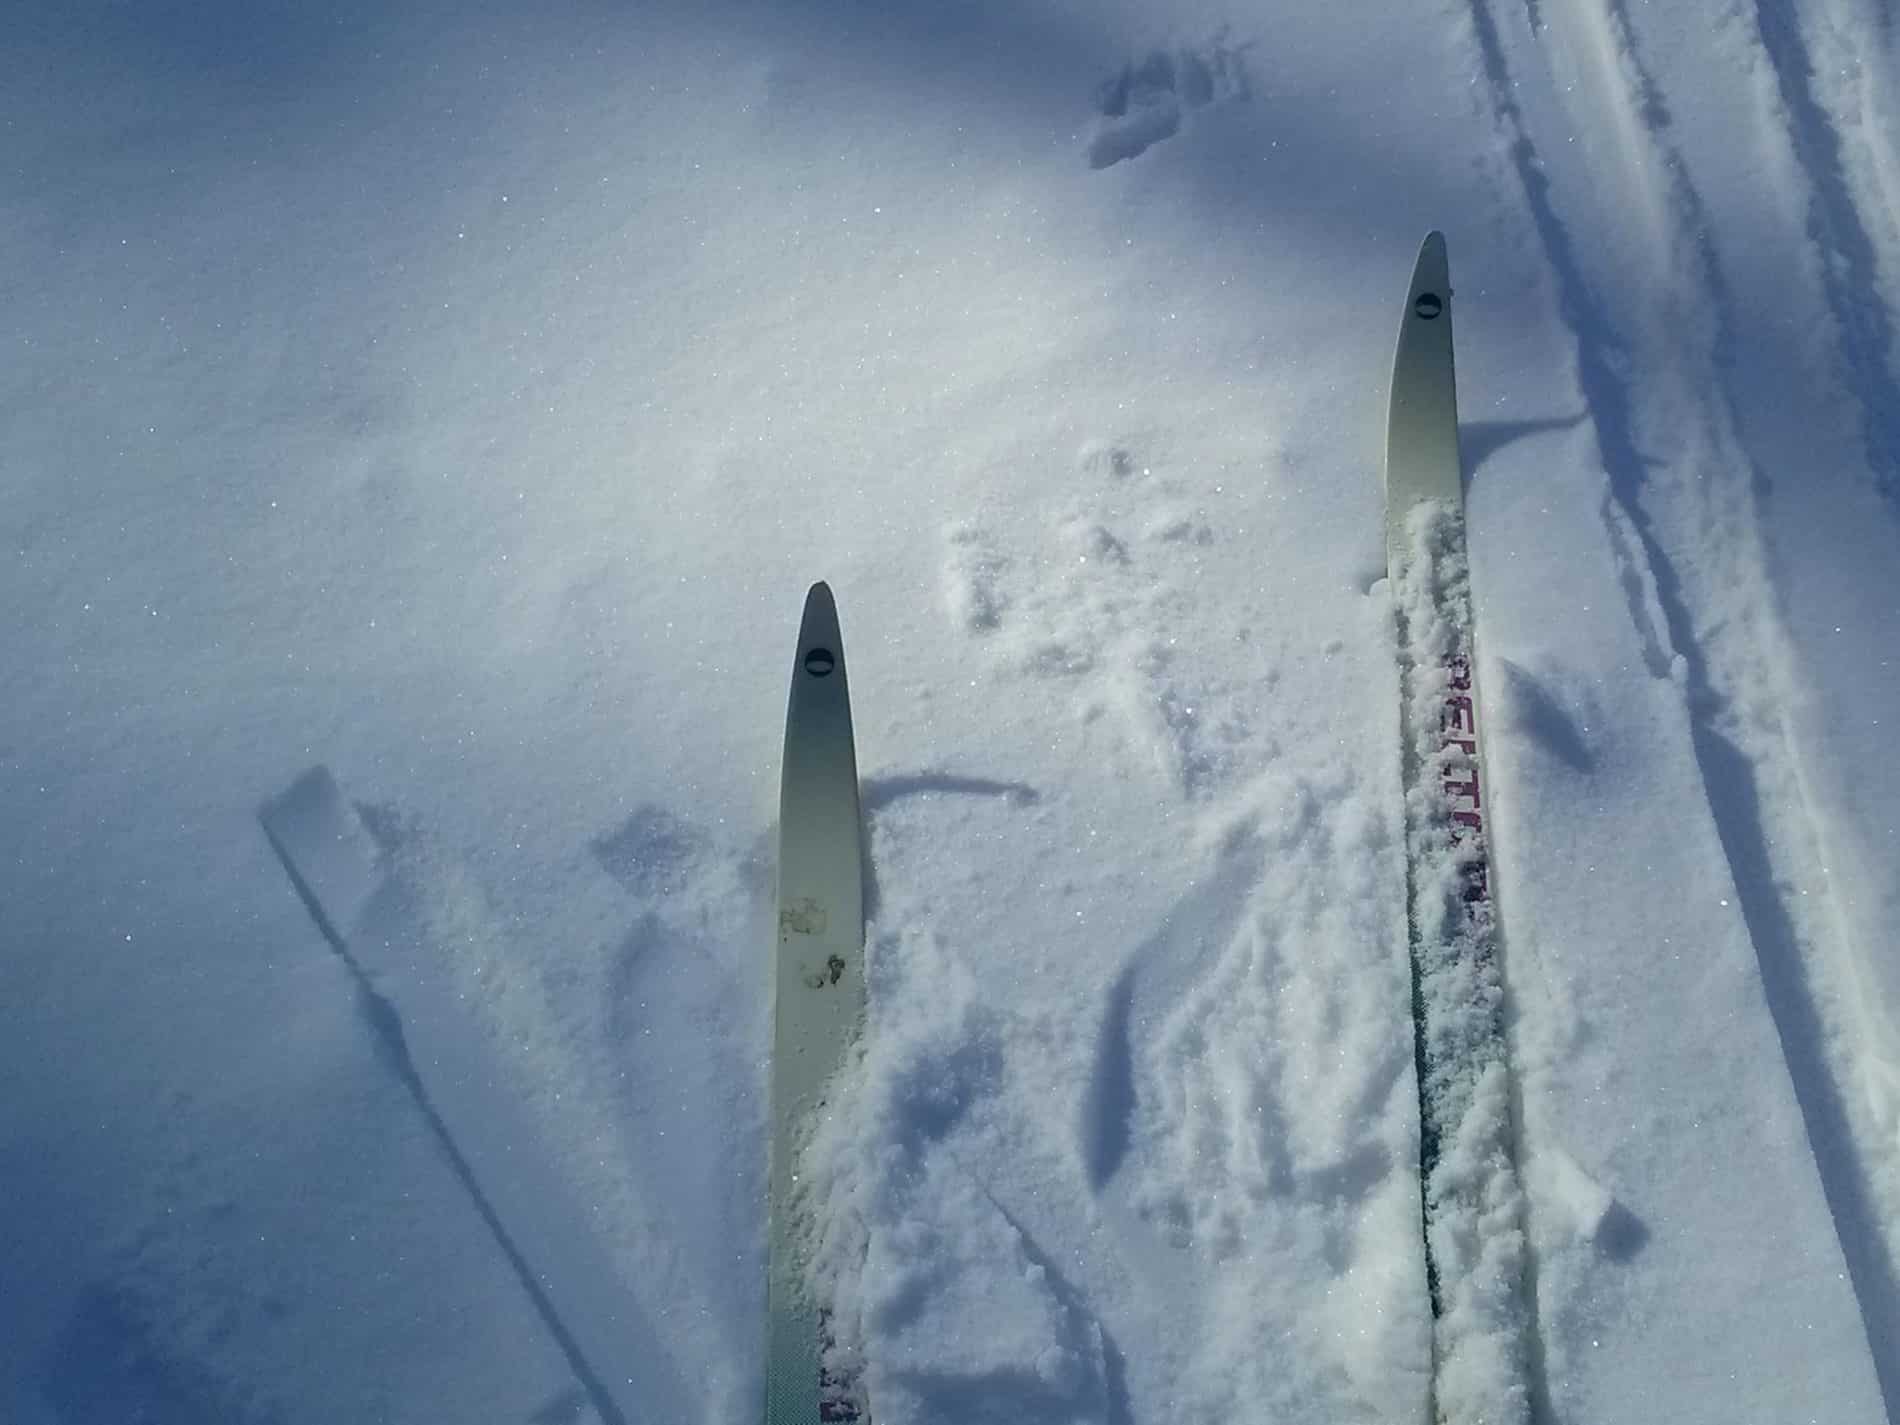 cross country skis on the snow